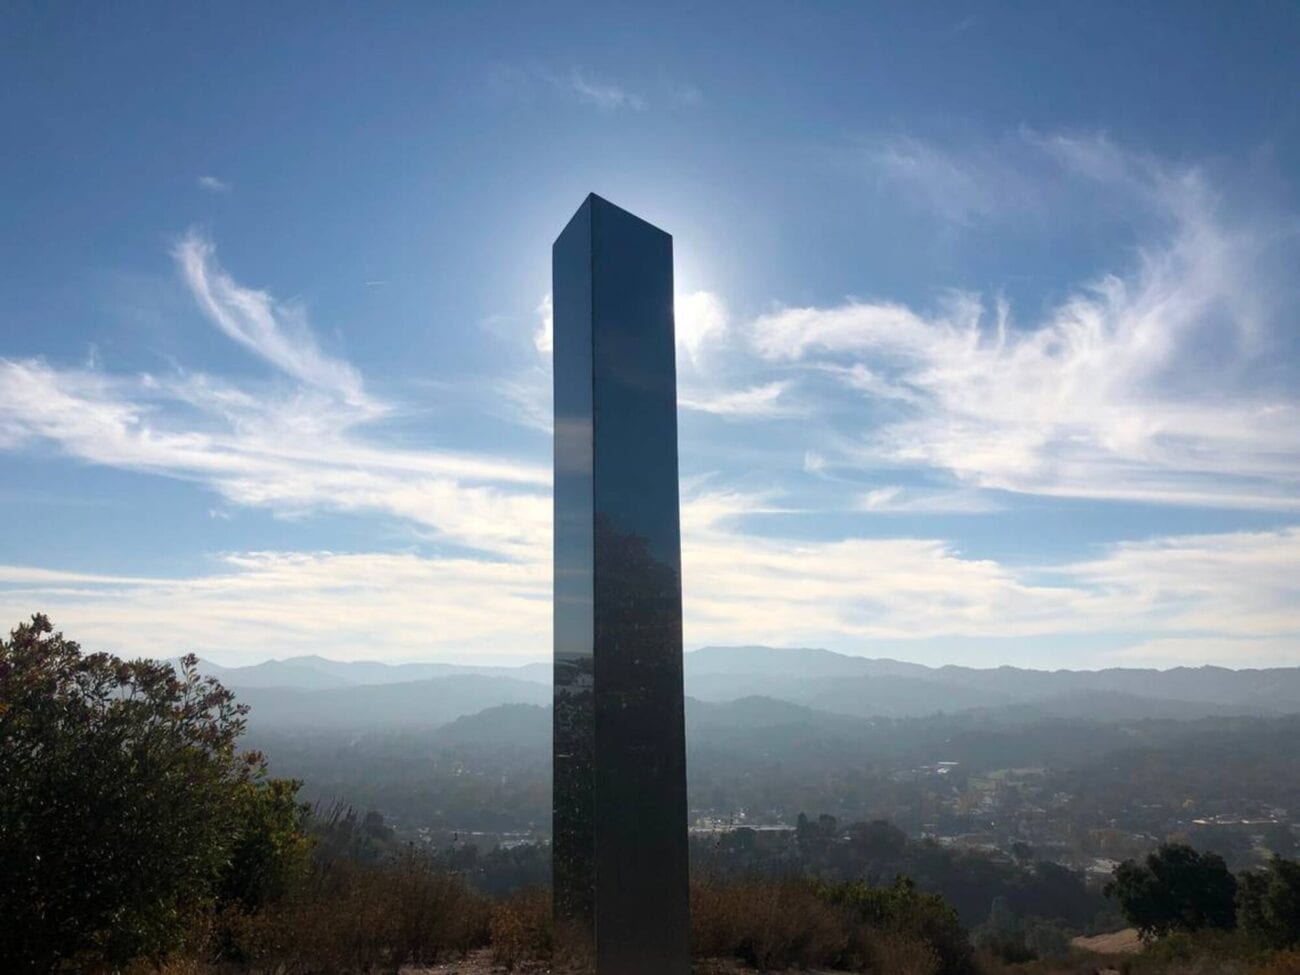 The phenomenon known as the Utah monolith has been appearing all over the globe, and now has popped up in California. We're guessing where it goes next.